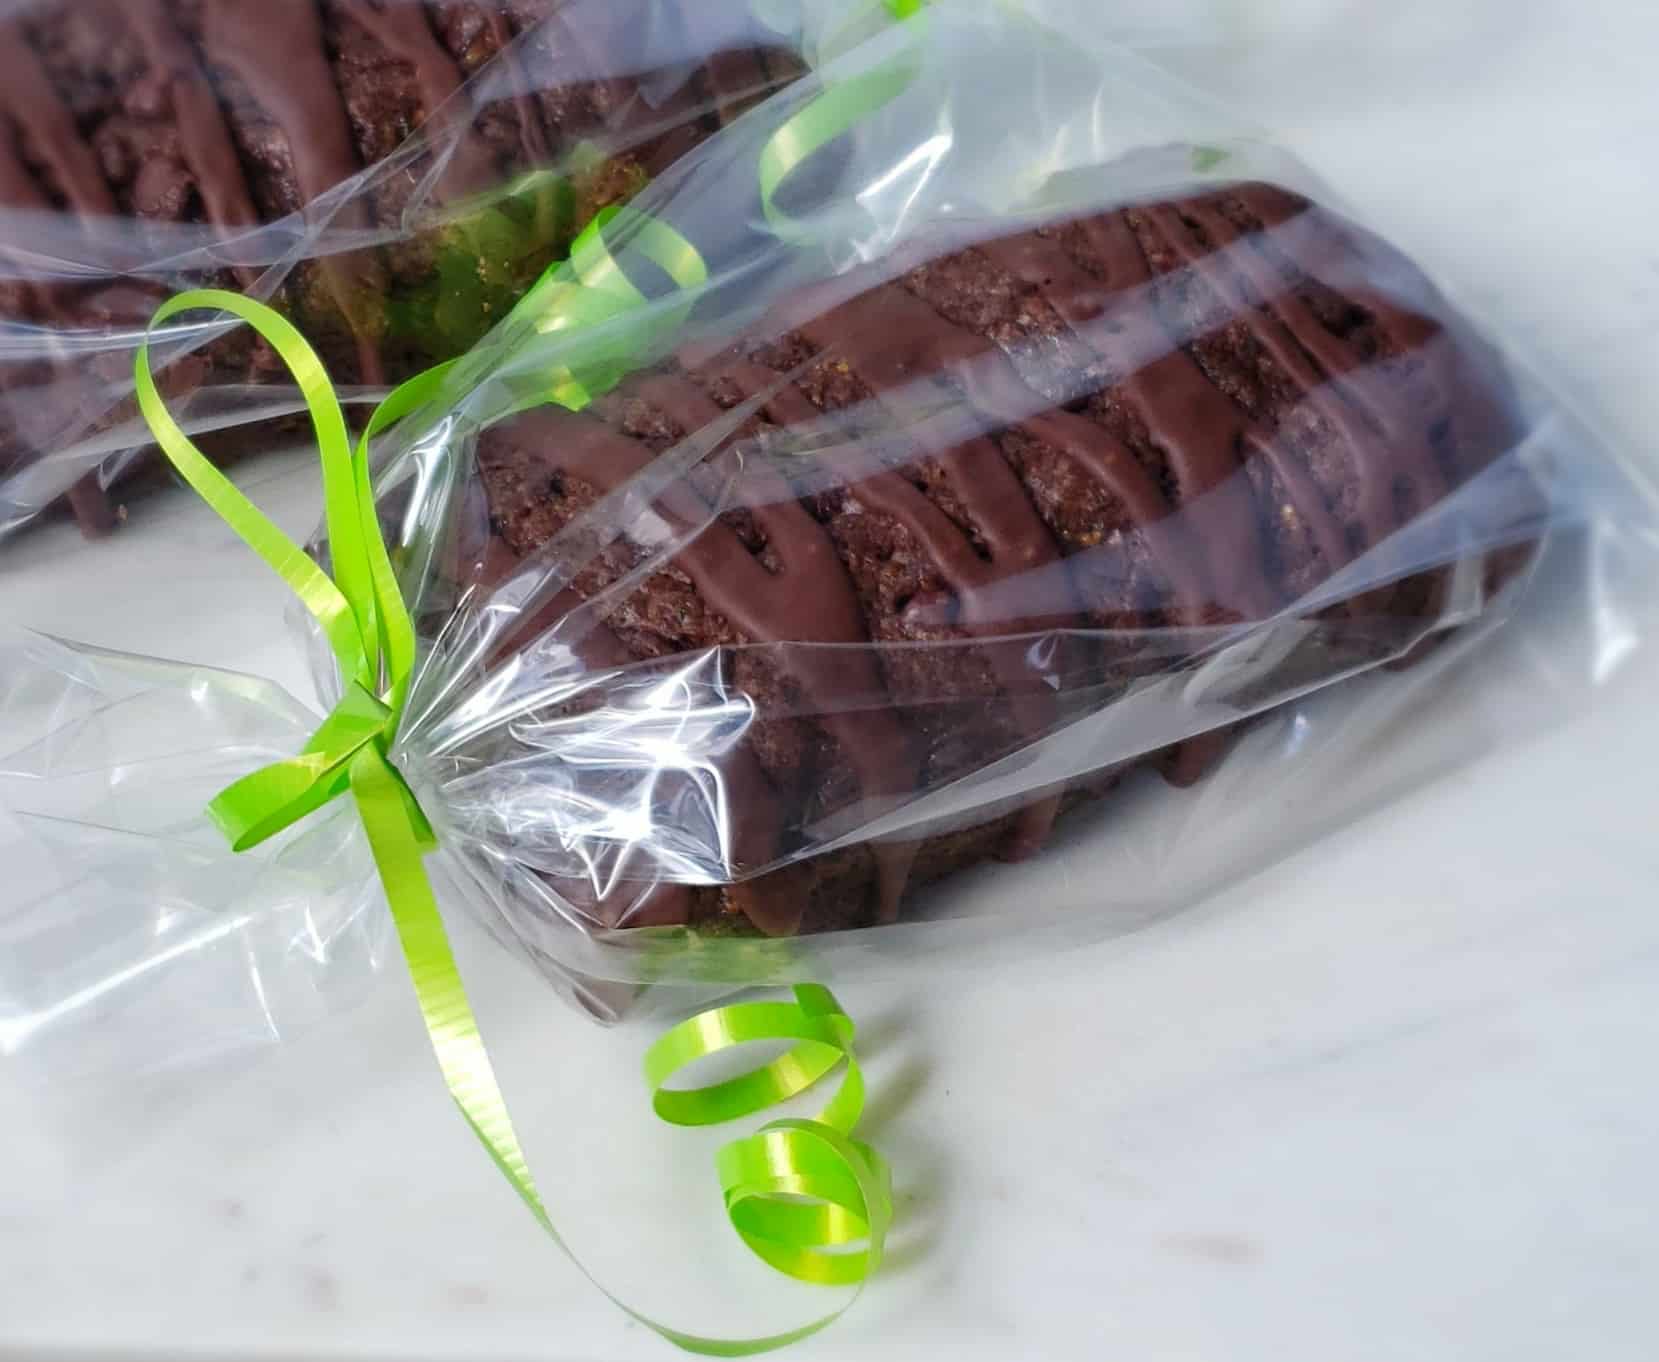 Glazed Nutella Chocolate Zucchini Bread is so rich and moist it could also be called cake! So easy. No mixer needed. Perfect for gift giving. Wrapped in a clear gift bag with lime green ribbon